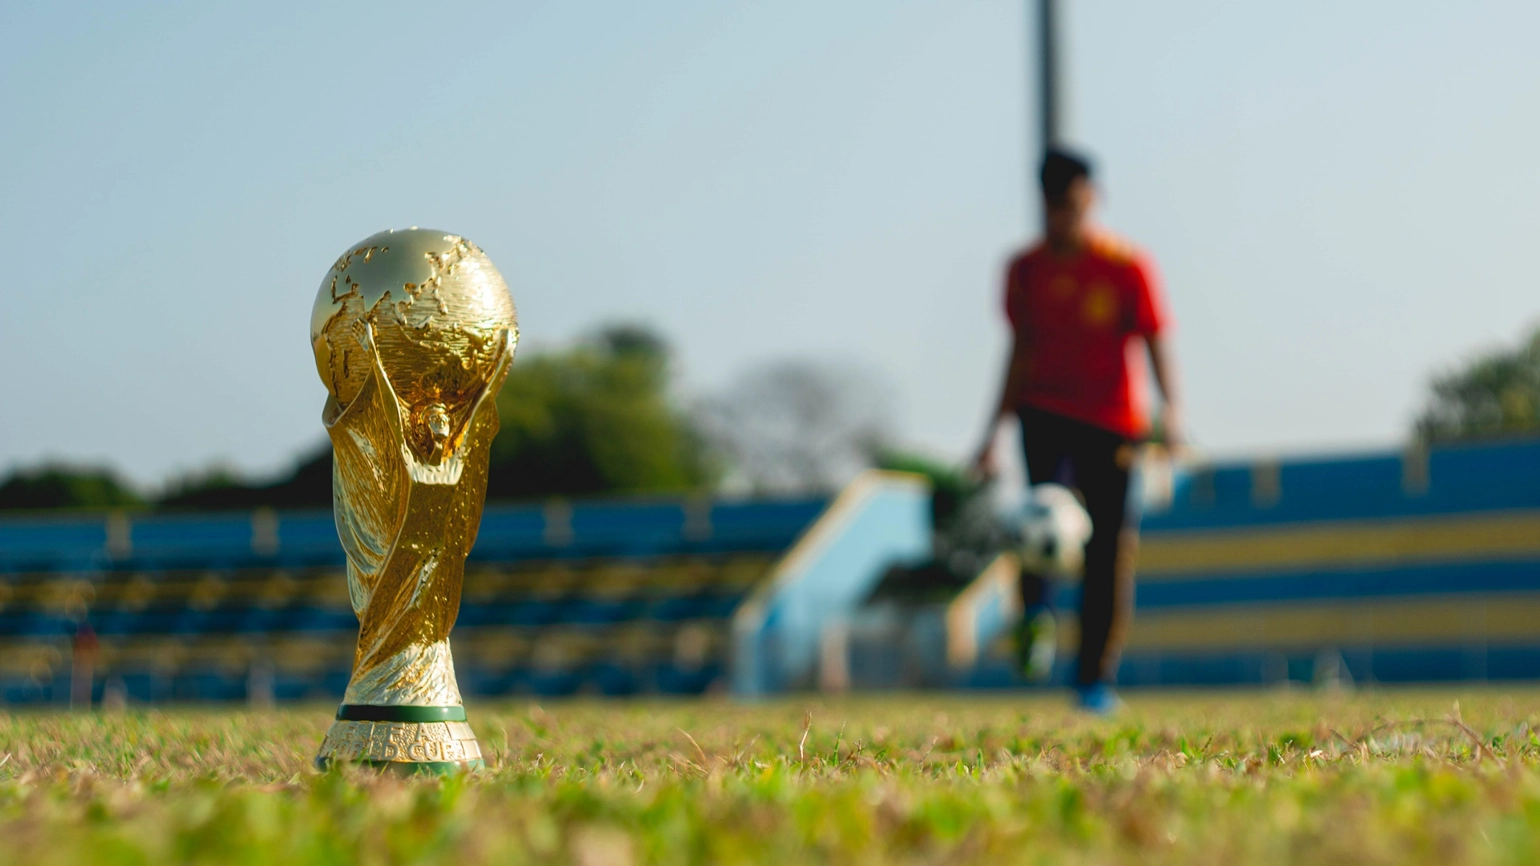 Photo of world cup in foreground and footballer out of focus in the background